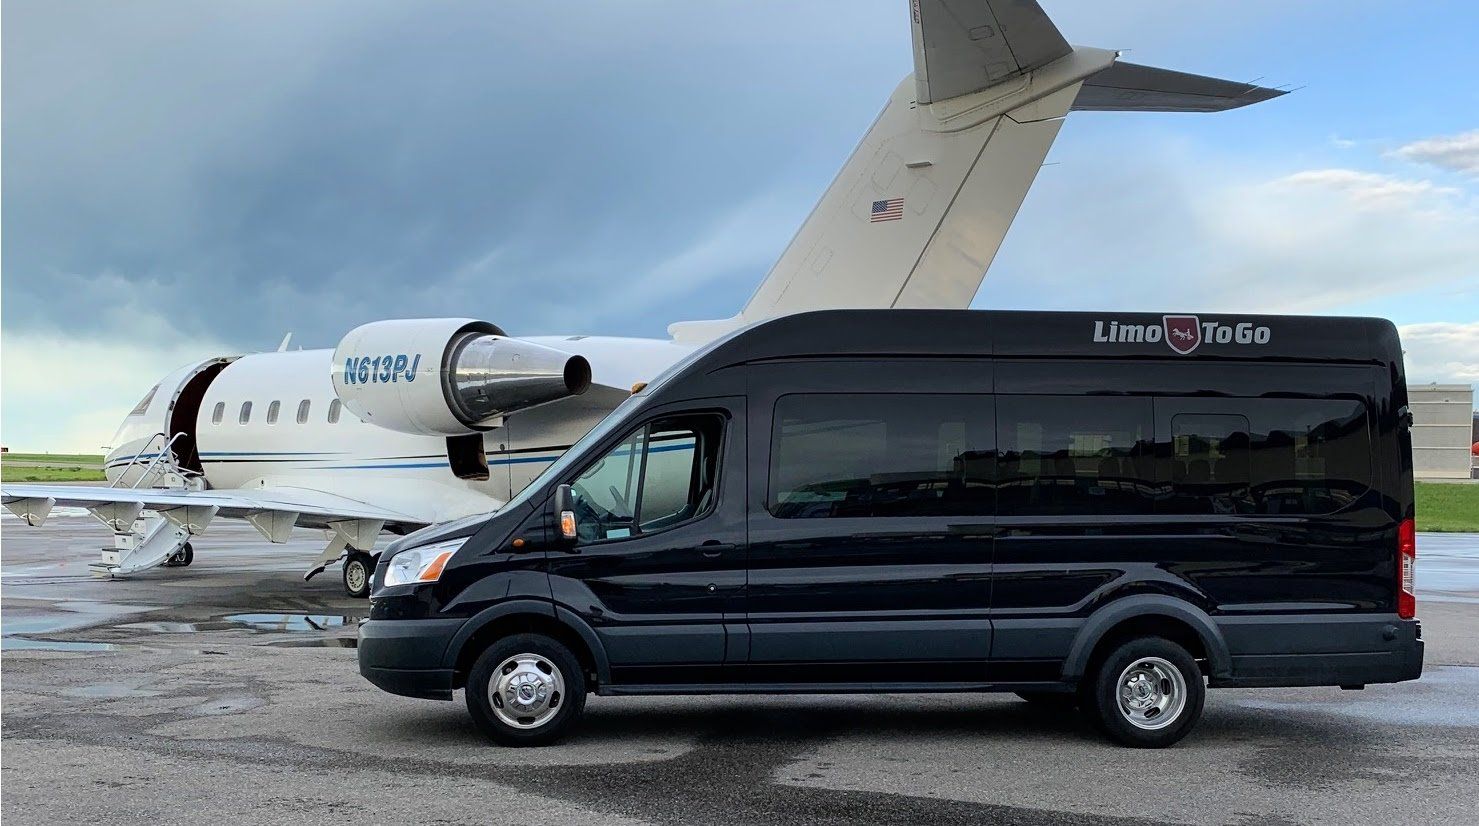 stretch limousine parked on runway beside private jet with lowered stairs